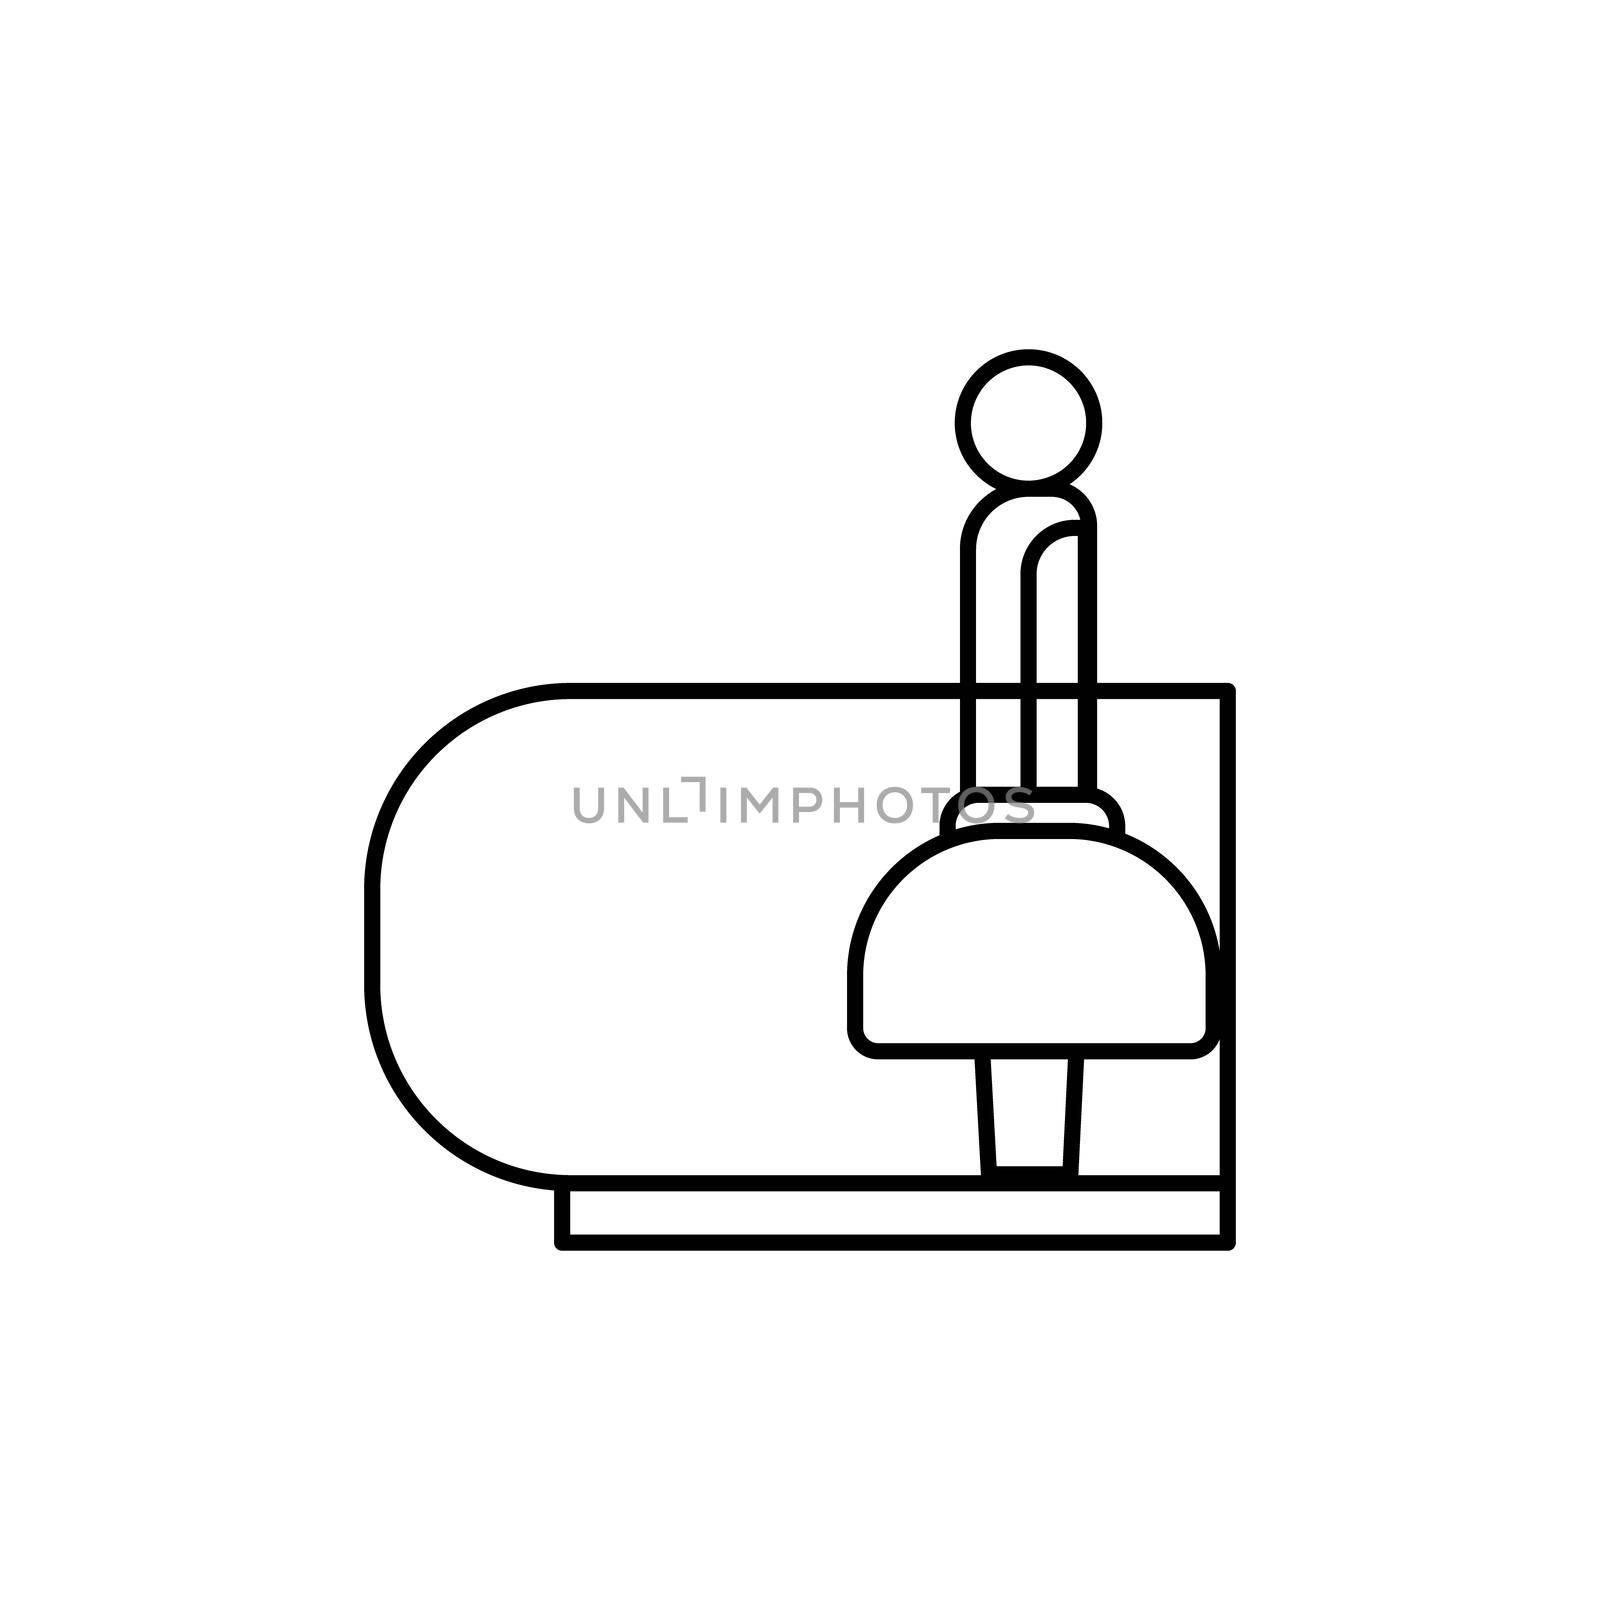 passenger, walkway, transportation line icon. elements of airport, travel illustration icons. signs, symbols can be used for web, logo, mobile app, UI, UX by fidaneagle